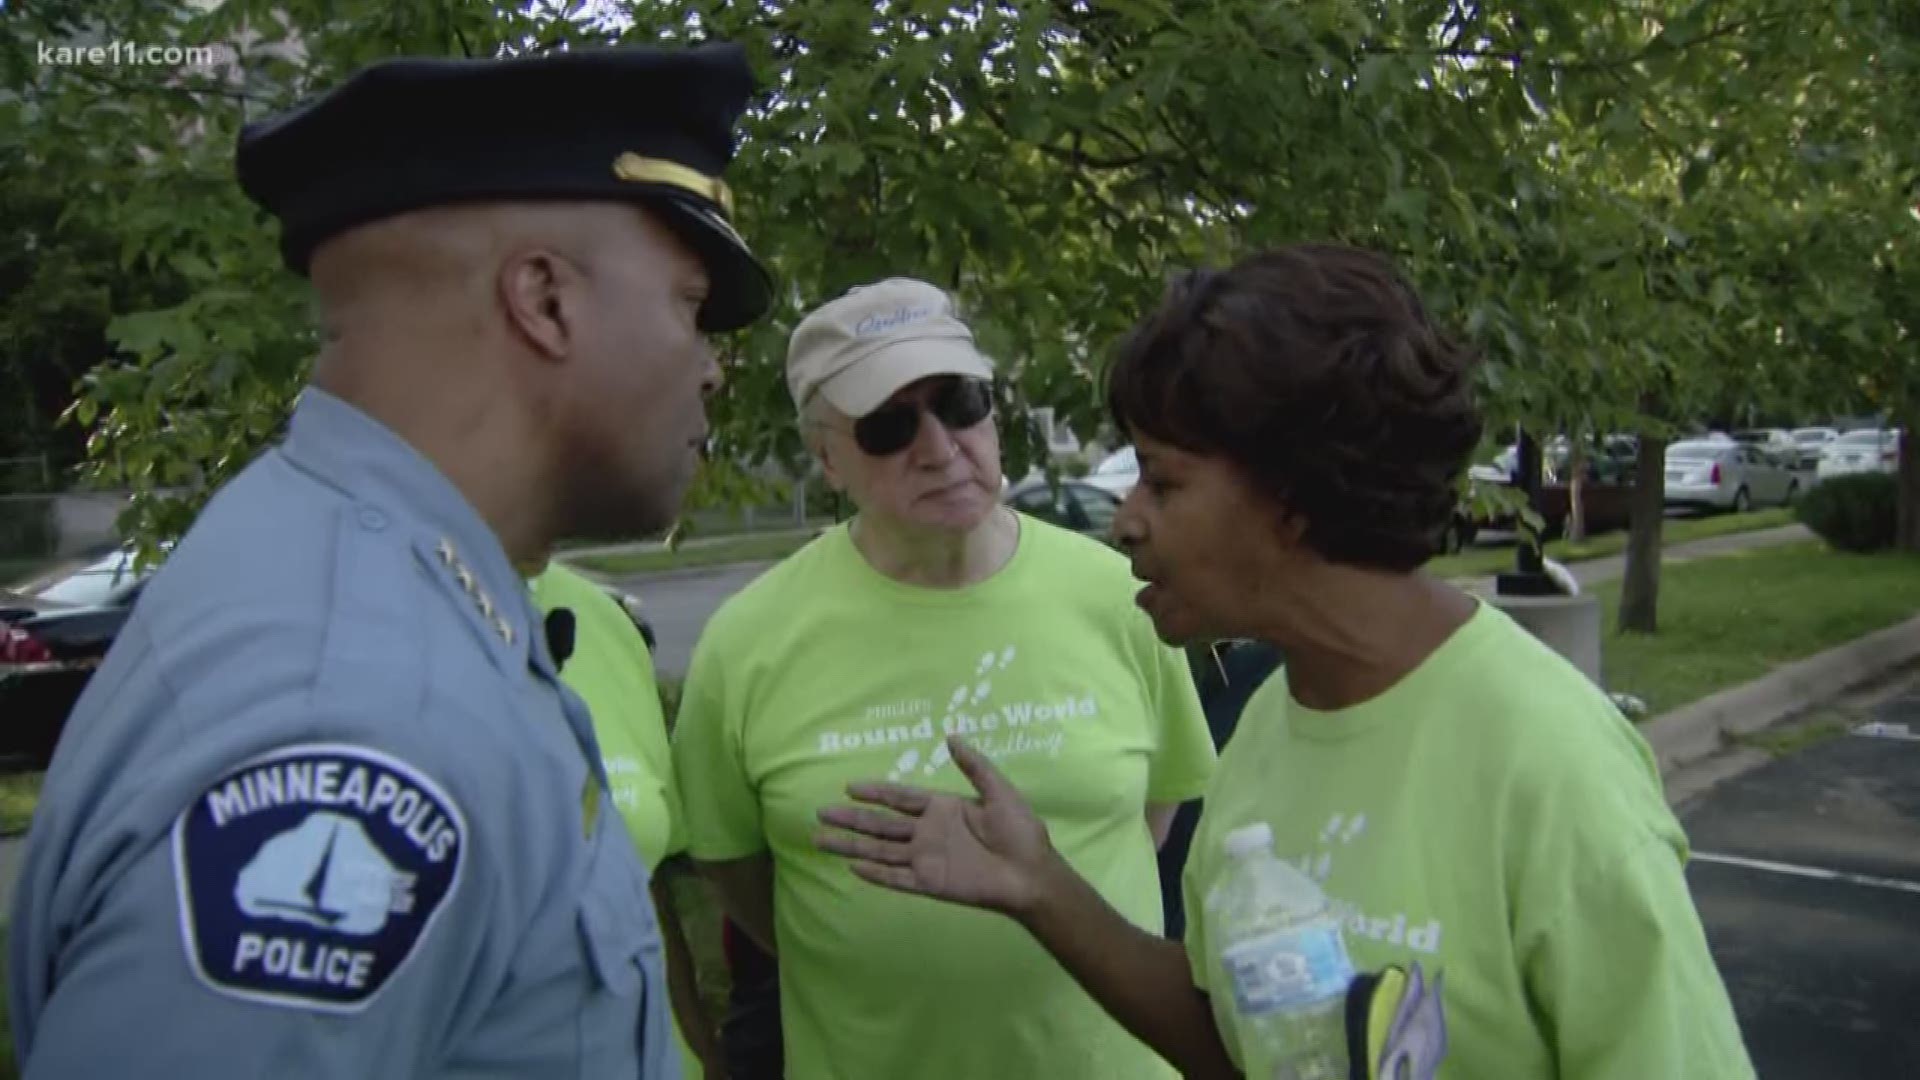 In Minneapolis and St. Paul, National Night Out took on a new meaning for some. The two cities are navigating through a tumultuous and emotional time, both dealing with the aftermath of separate fatal police shootings.